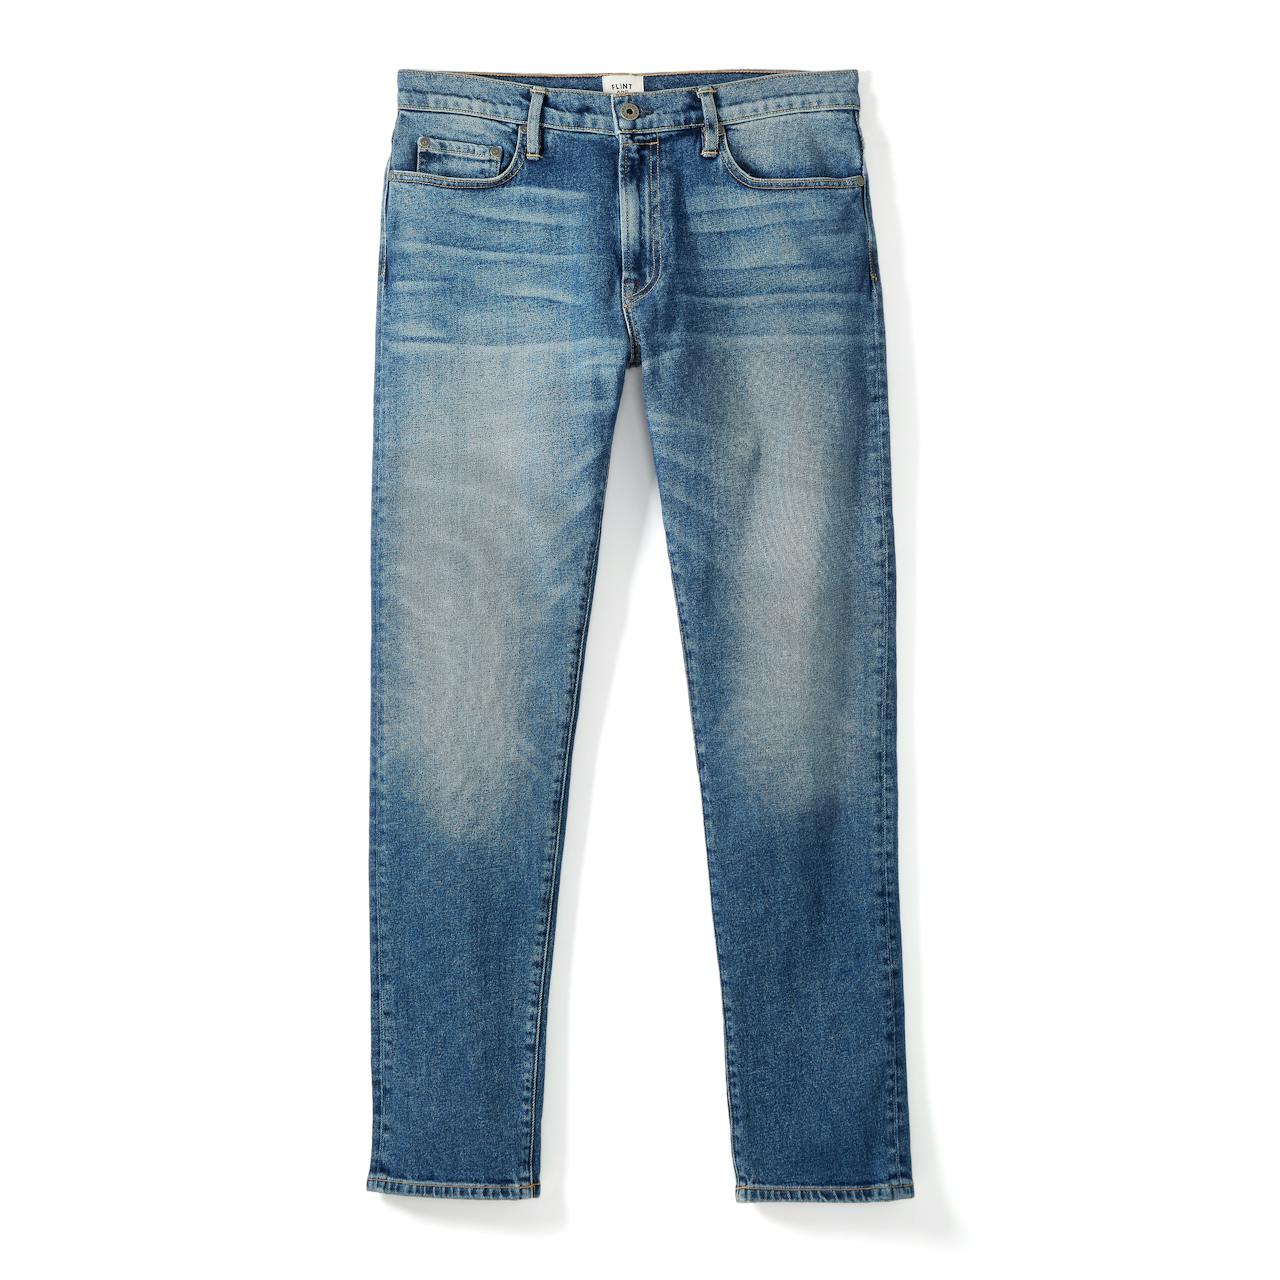 Flint and Tinder All-American Stretch Denim - Athletic Tapered